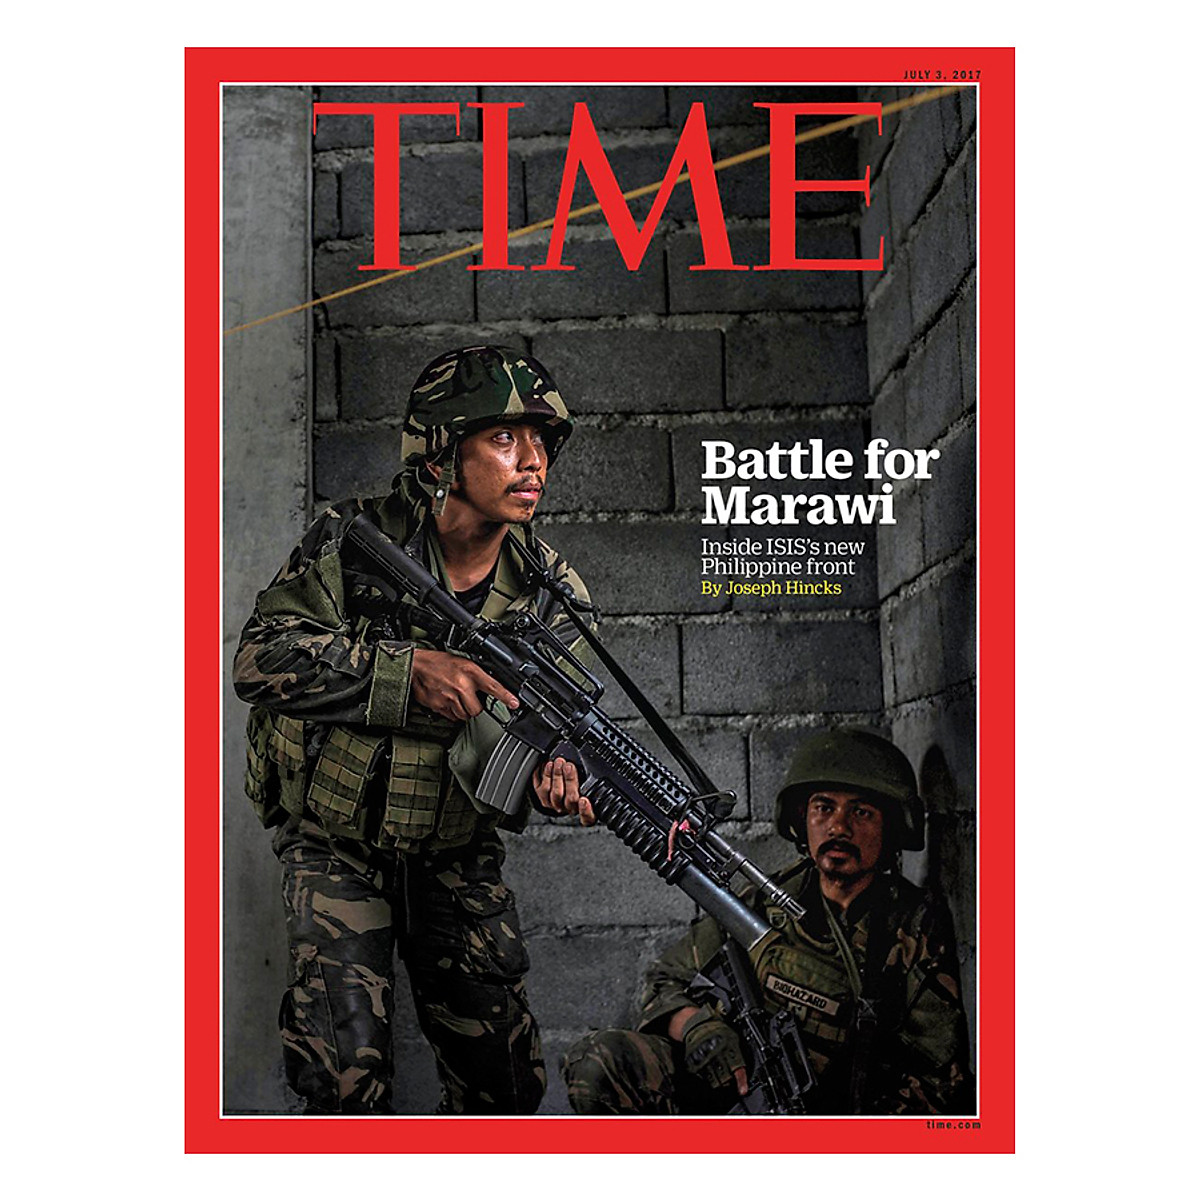 Time: Battle For Marawi - 23